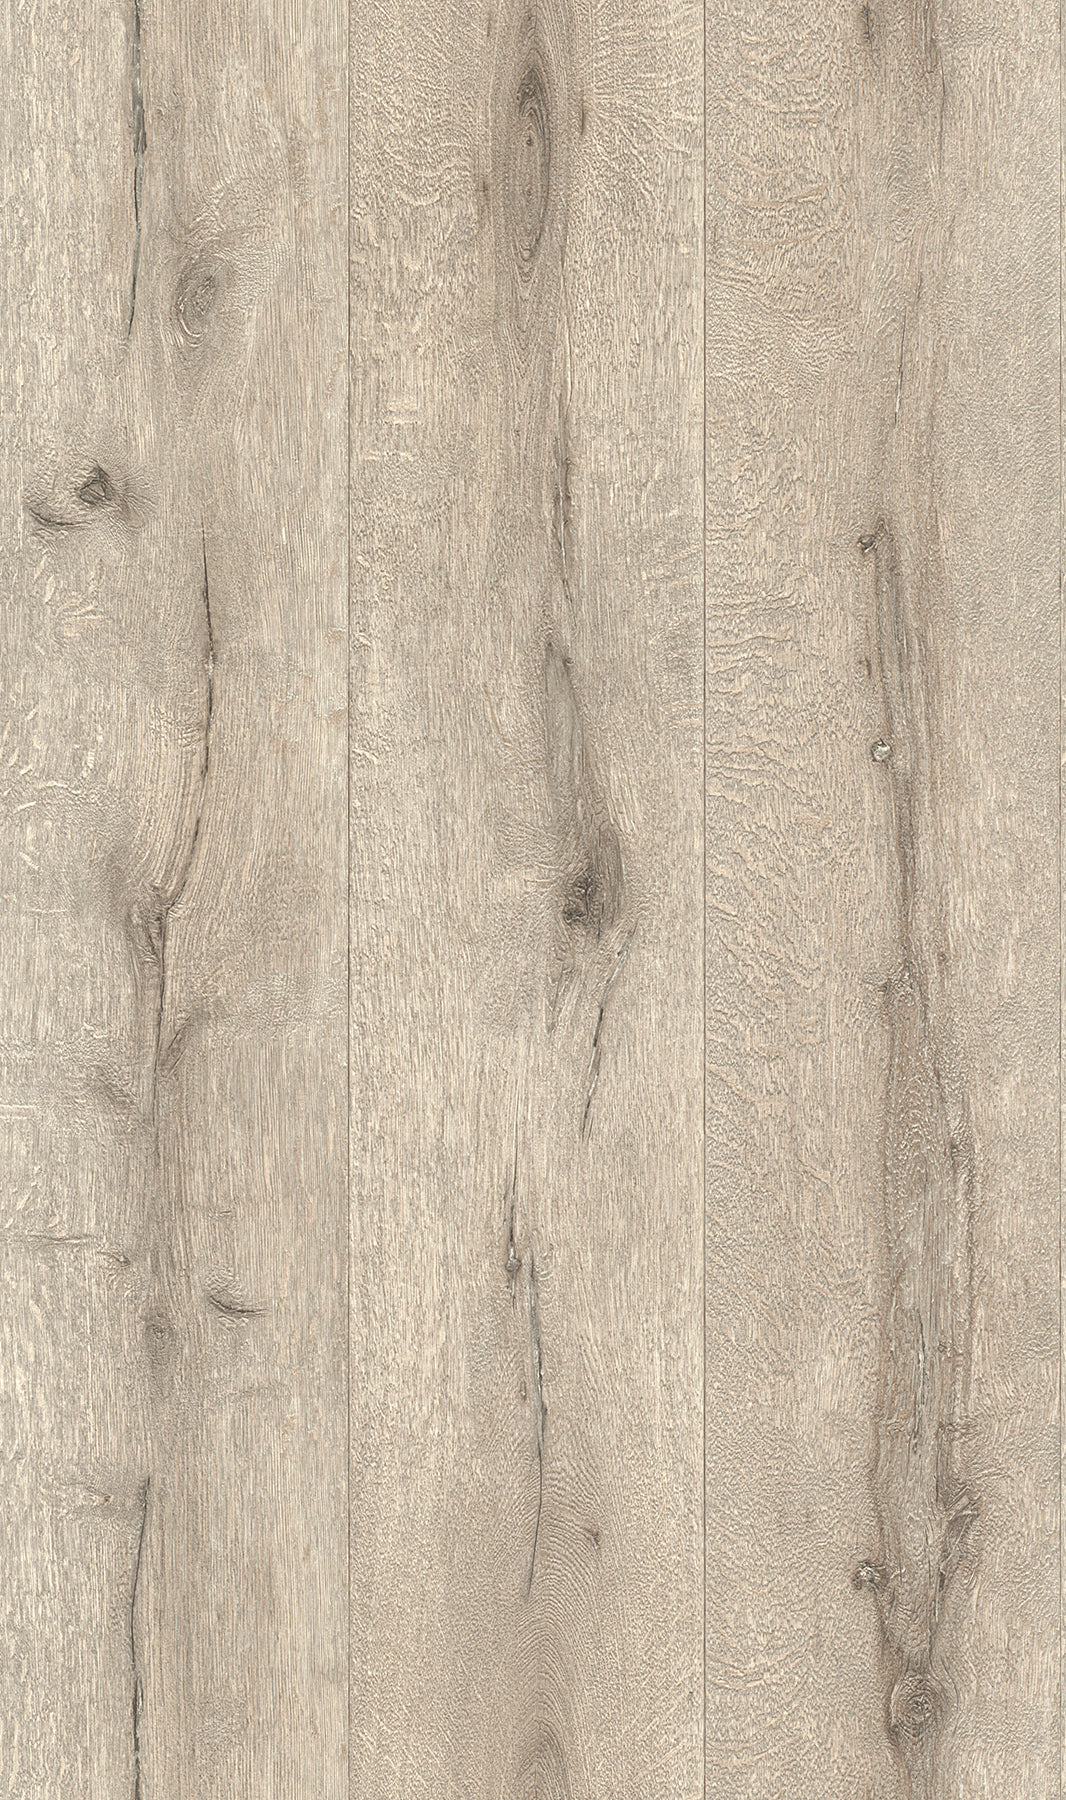 Looking 4015-514483 Beyond Textures Appalacian Taupe Wood Planks Taupe by Advantage